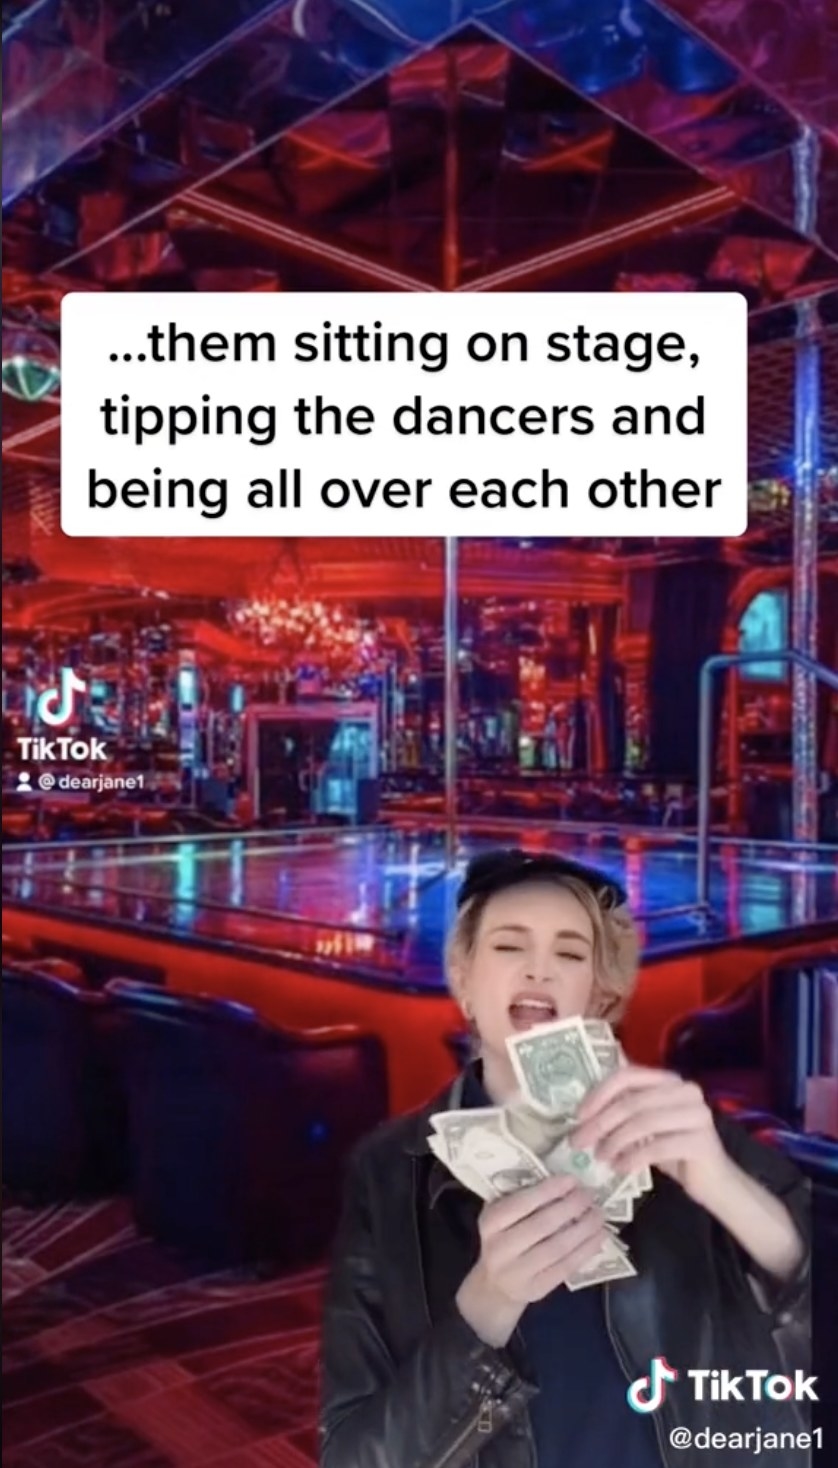 A TikTok screenshot where a woman recreating the situation throws money in front of a stripper pole